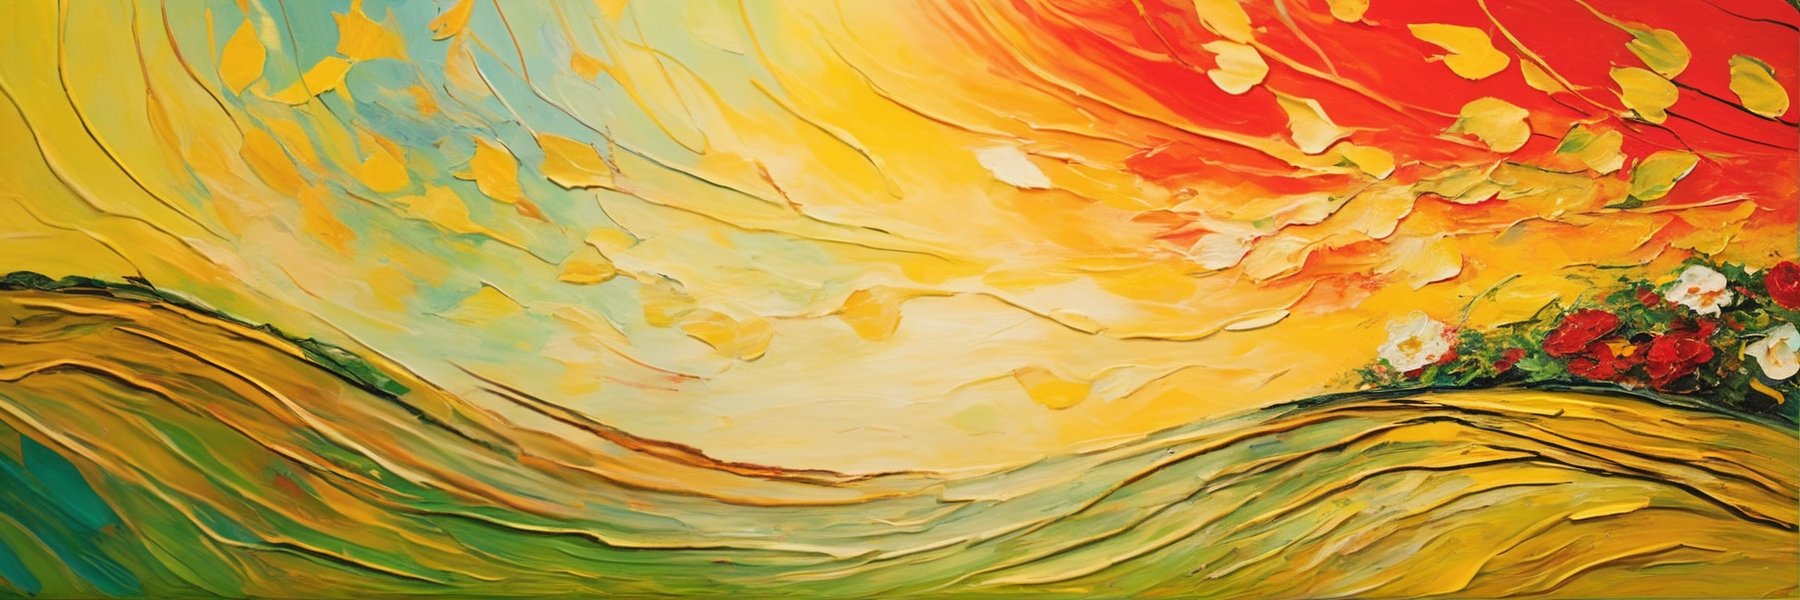 A mesmerizing piece of abstract art, inspired by the legendary artists Gauguin and Van Gogh, captures the essence of a rejuvenating spring. The canvas is a vibrant explosion of colors, with fiery reds and golden yellows symbolizing the warmth and passion of the season's rebirth. Dreamlike elements dance within the painting, intertwining with the swirling colors and representing the delicate blossoming of nature. The texture of the artwork conveys the unpredictable and dynamic nature of spring, while the harmonious blend of traditional and contemporary styles creates a surreal landscape that transcends time. This breathtaking masterpiece celebrates the eternal beauty of spring's awakening, a testament to the enduring power of artistic expression.